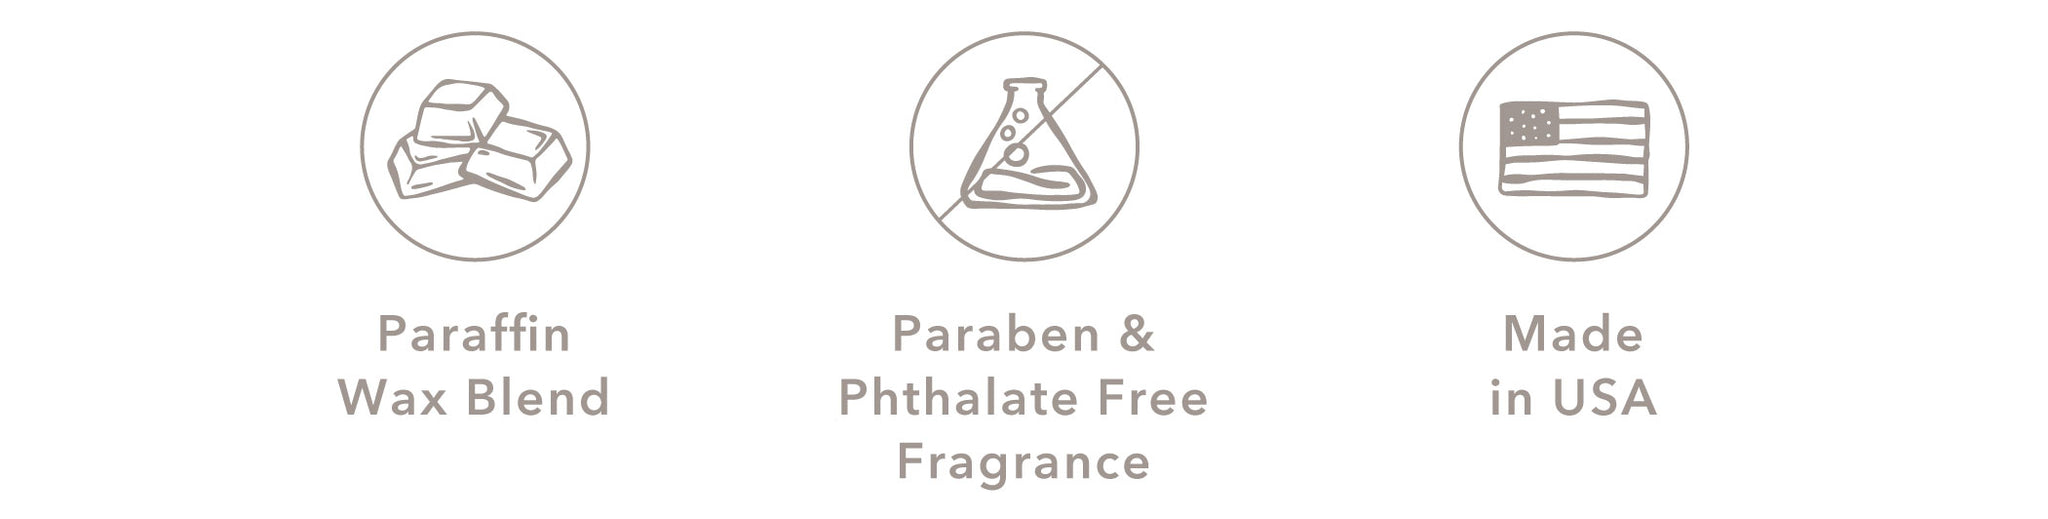 Paraffin Wax Blend | Paraben & Phthalate Free Fragrance | Made in USA